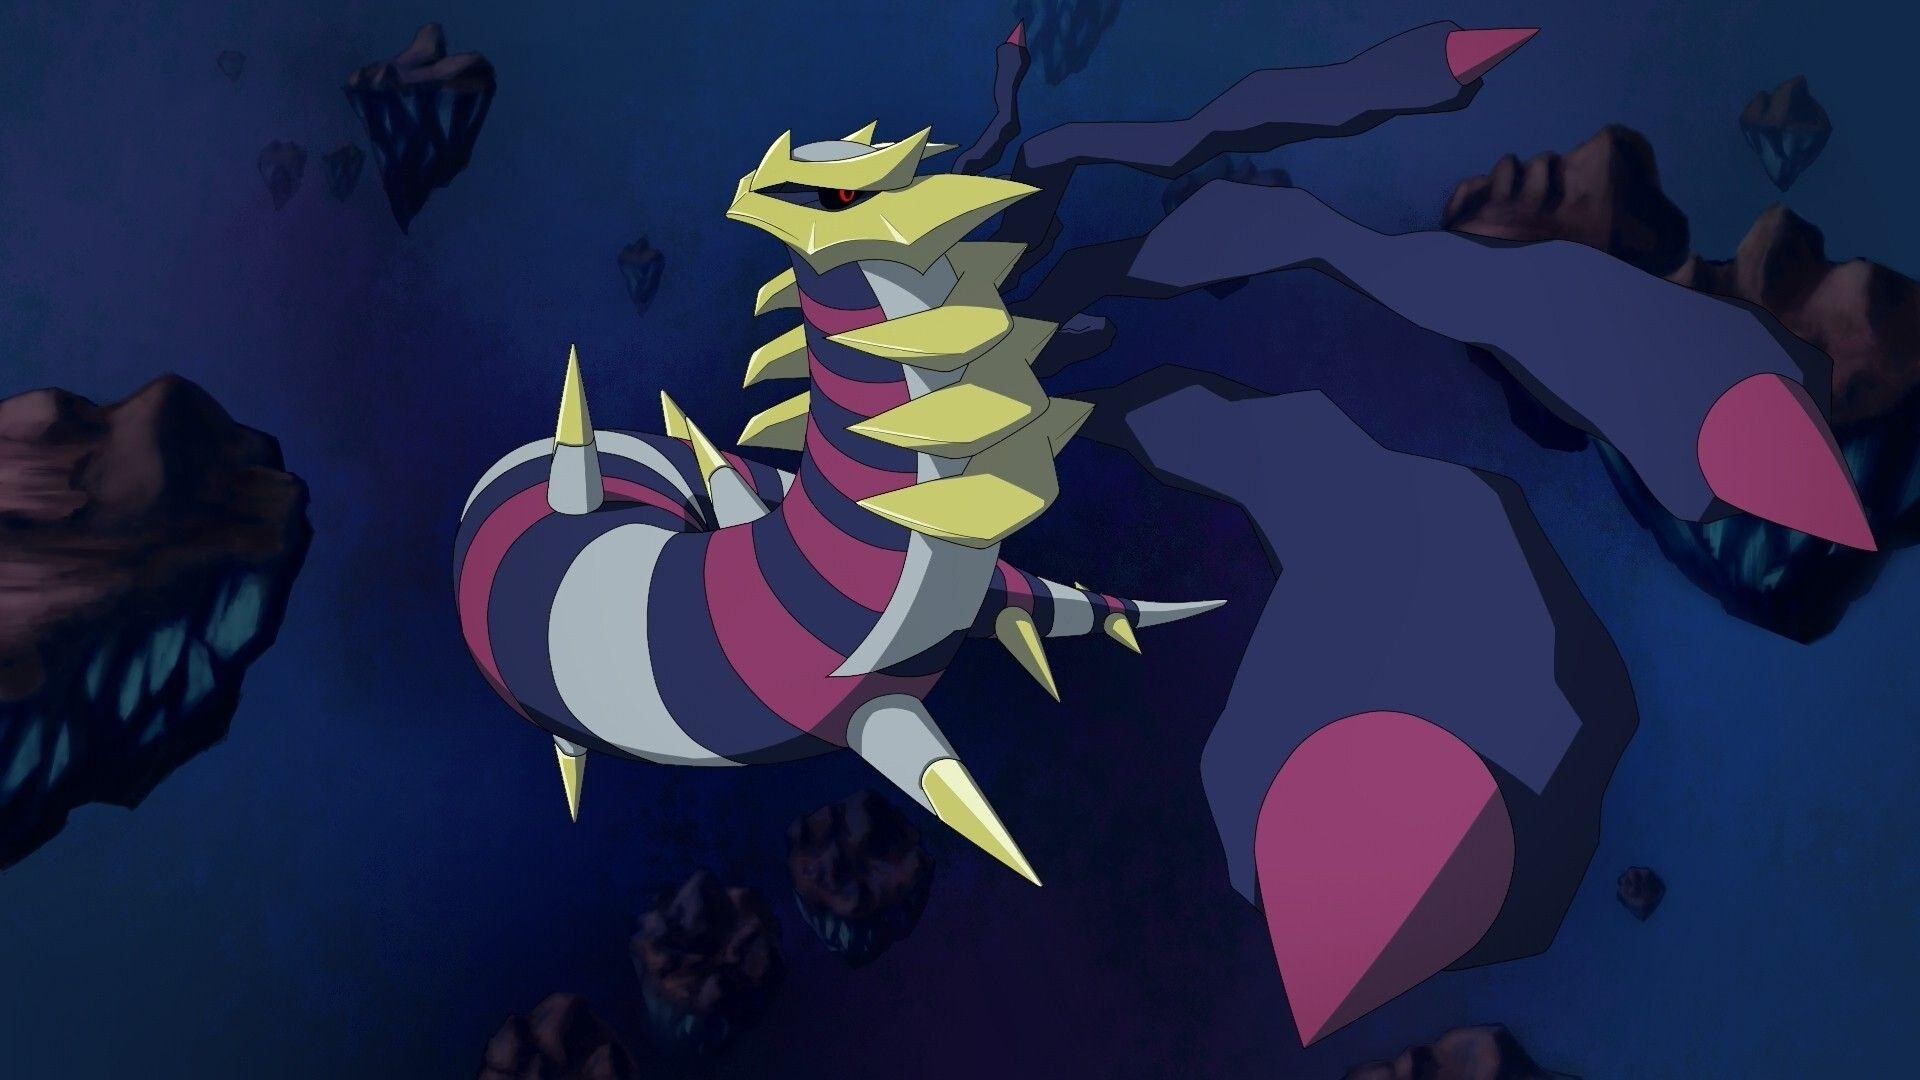 Giratina: The Pokemon having the power to turn itself into a shadow, 6 legs, Gold protrusions that look like external ribs. 1920x1080 Full HD Wallpaper.